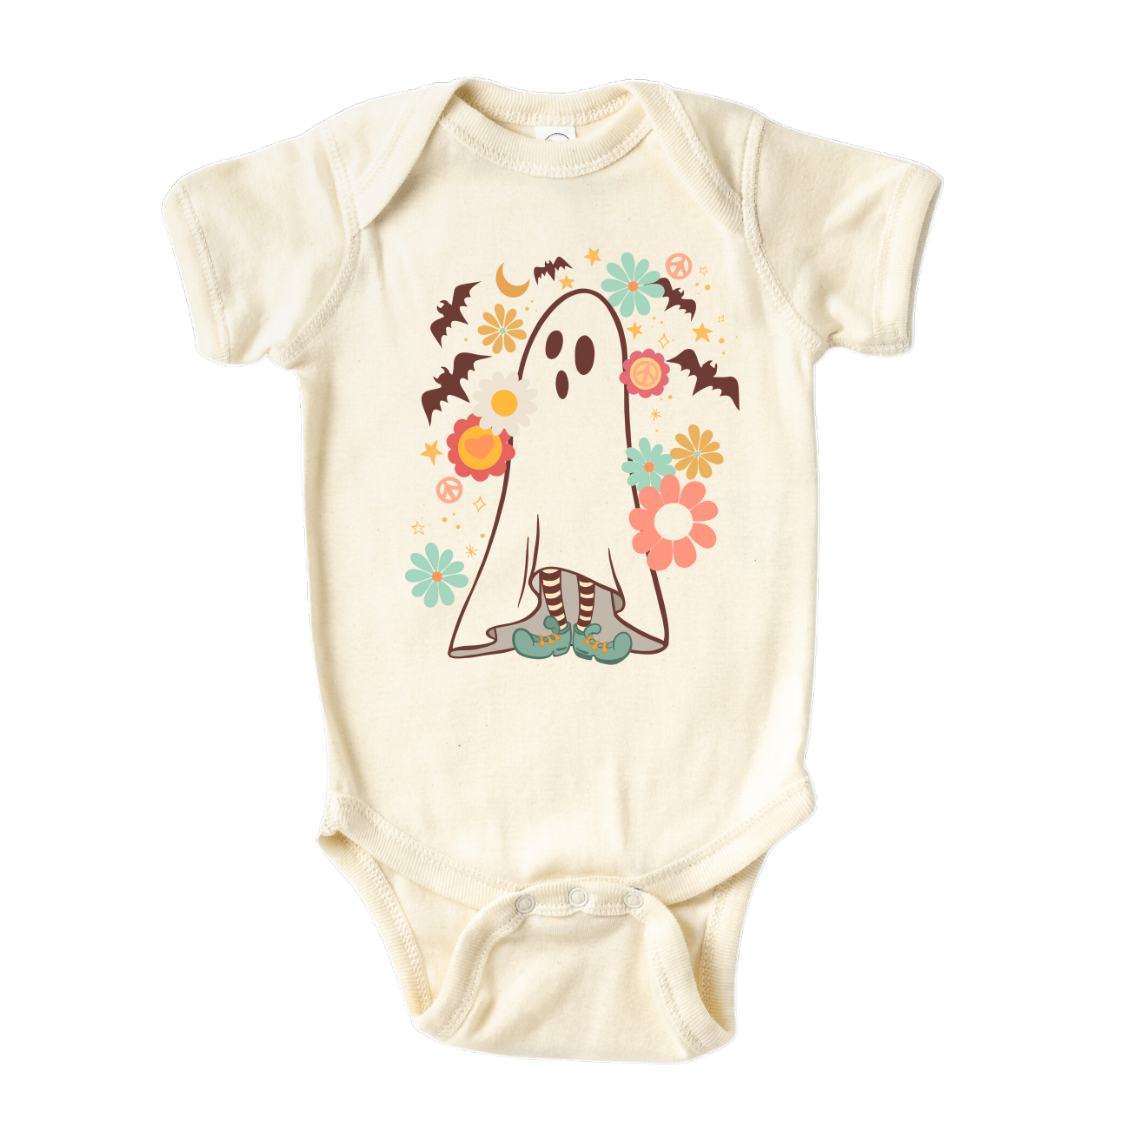 Cute Ghost Graphic Tshirt for Kids Cute Girls Tshirt Halloween Outfit for Girls Newborn Outfits Baby Onesie Newborn Clothes Gift for Newborns